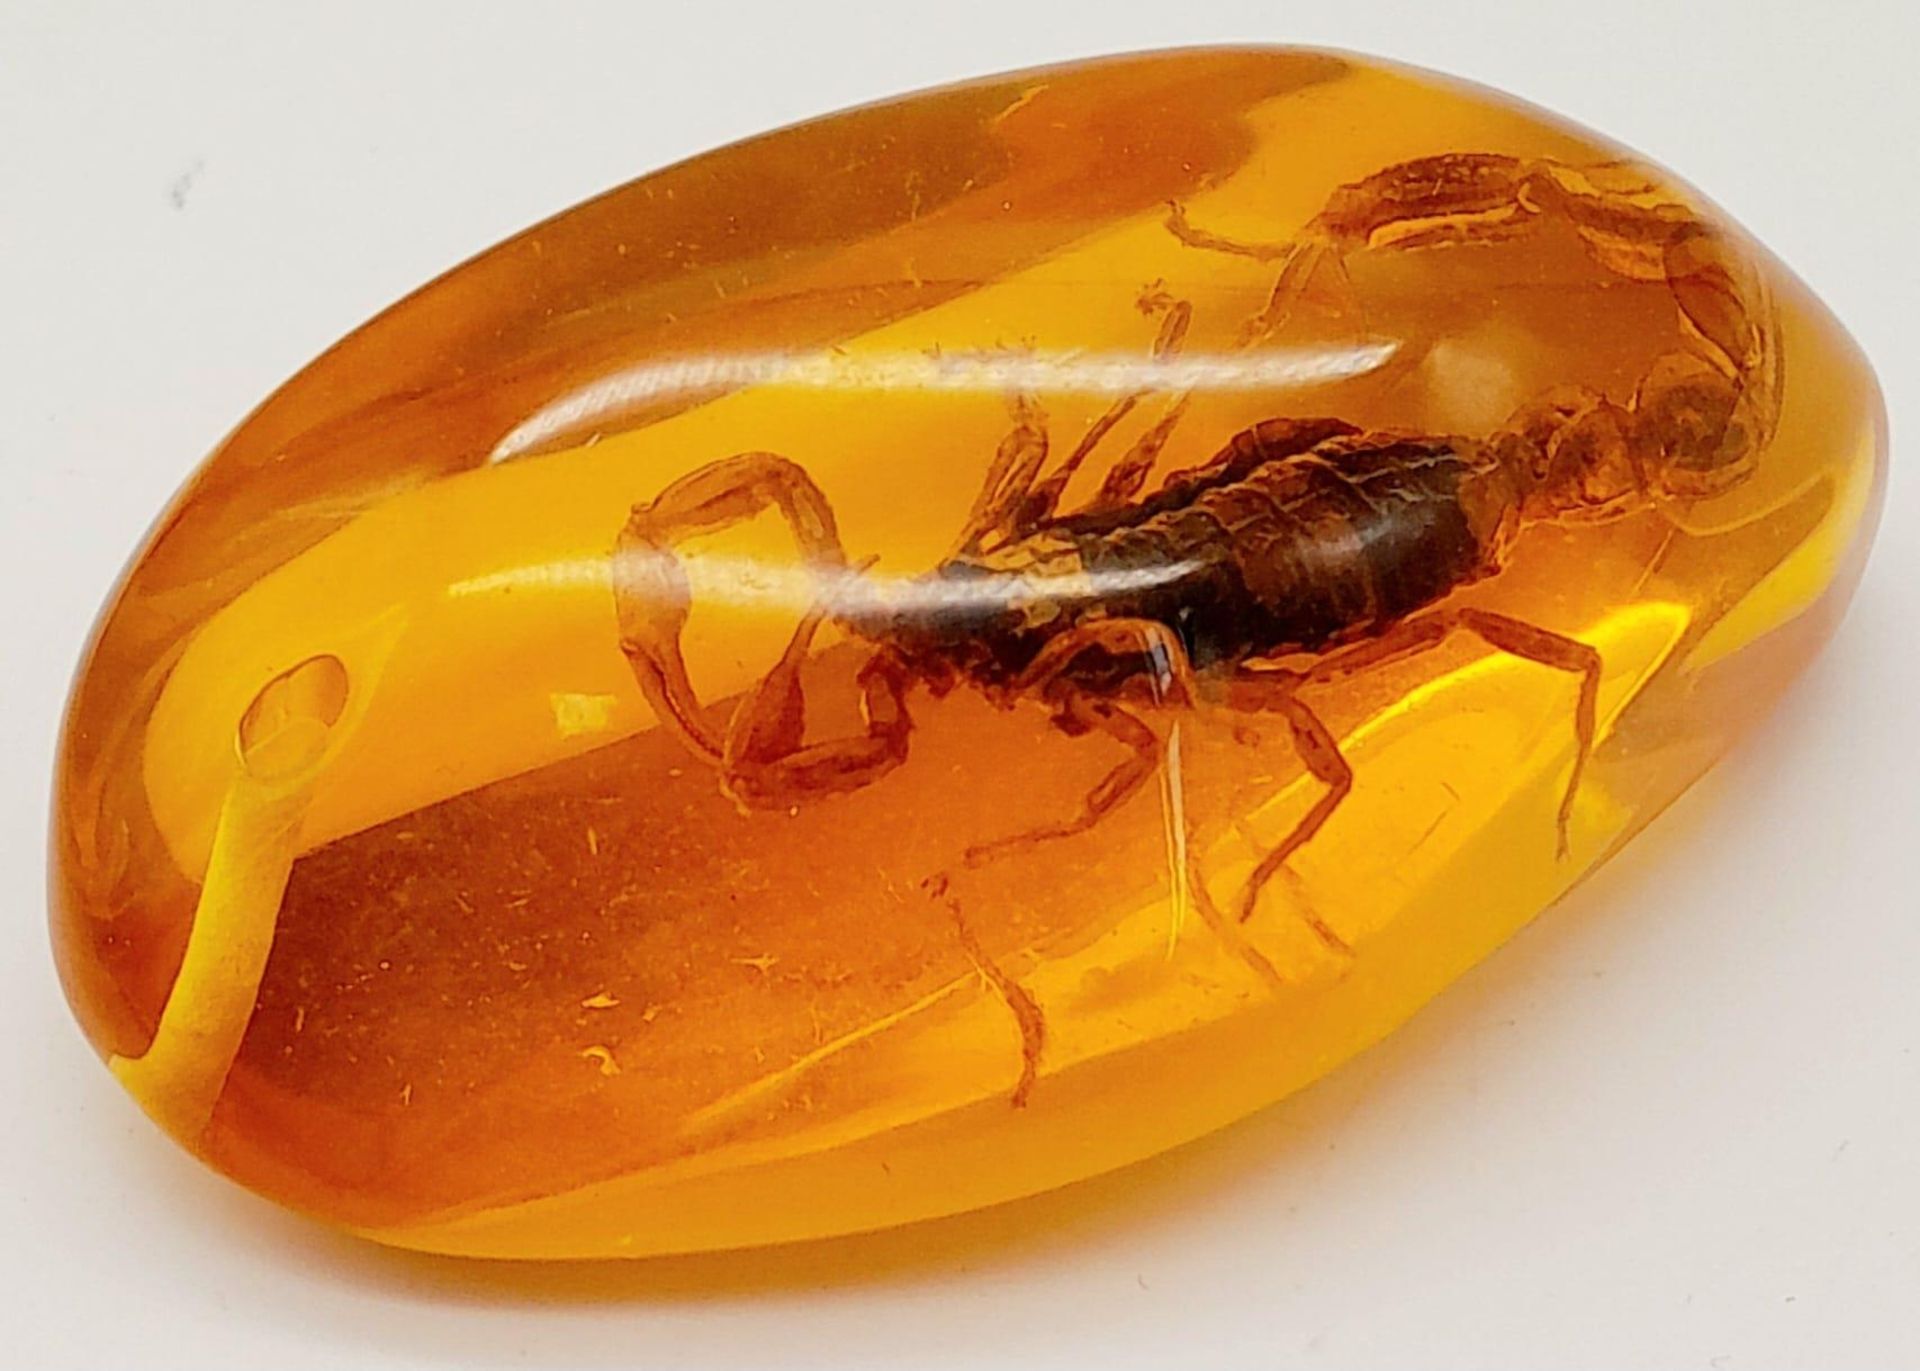 A Tail of the Unexpected! The Scorpion now Resides in an Amber Resin Prison for all of Eternity. - Image 2 of 4